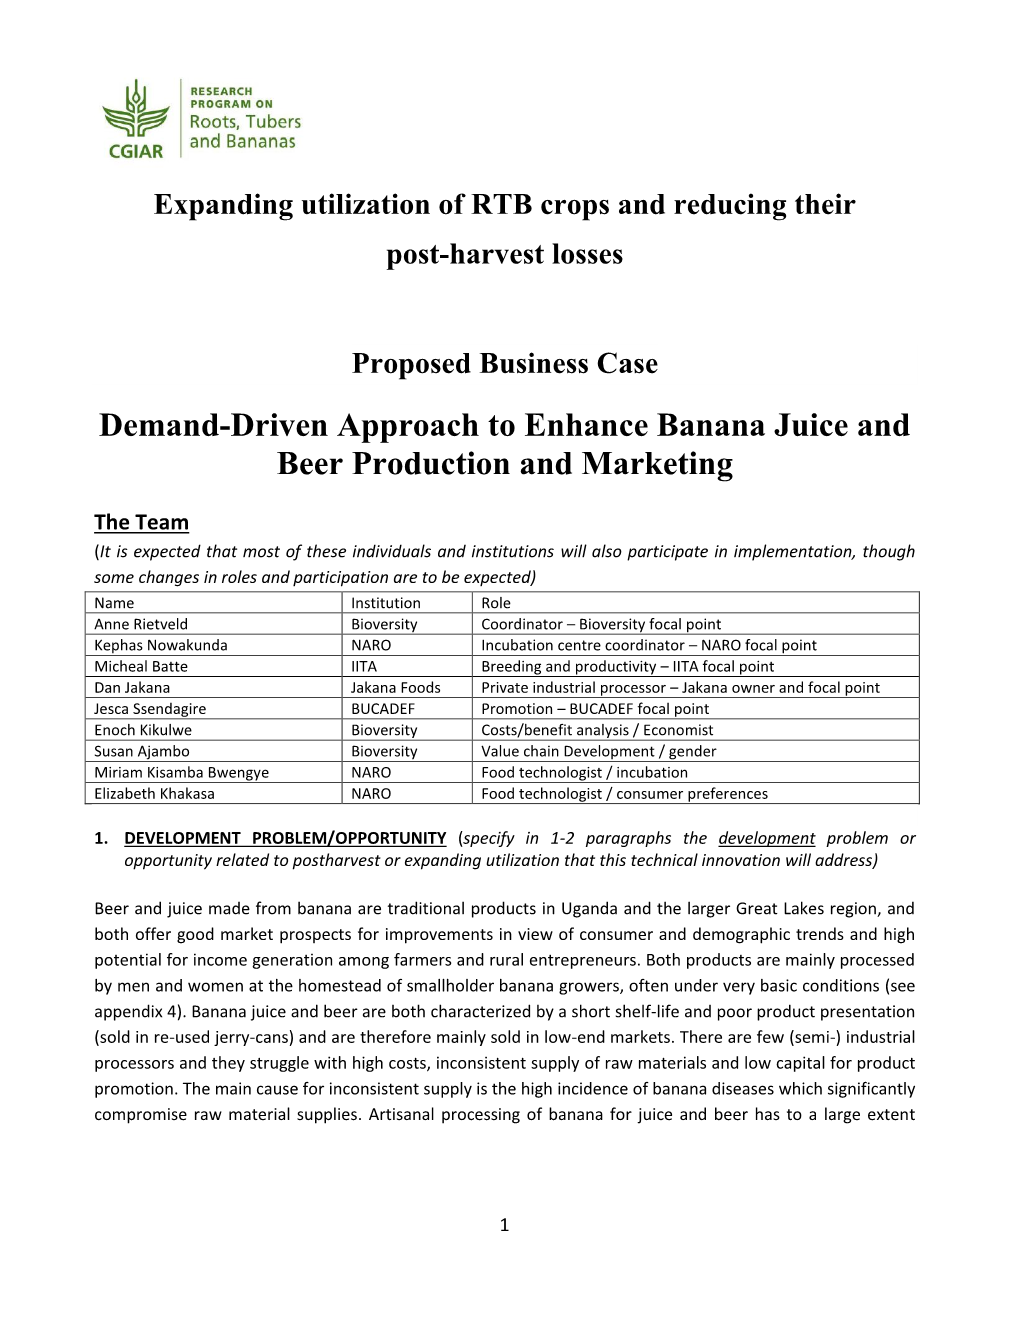 Demand-Driven Approach to Enhance Banana Juice and Beer Production and Marketing